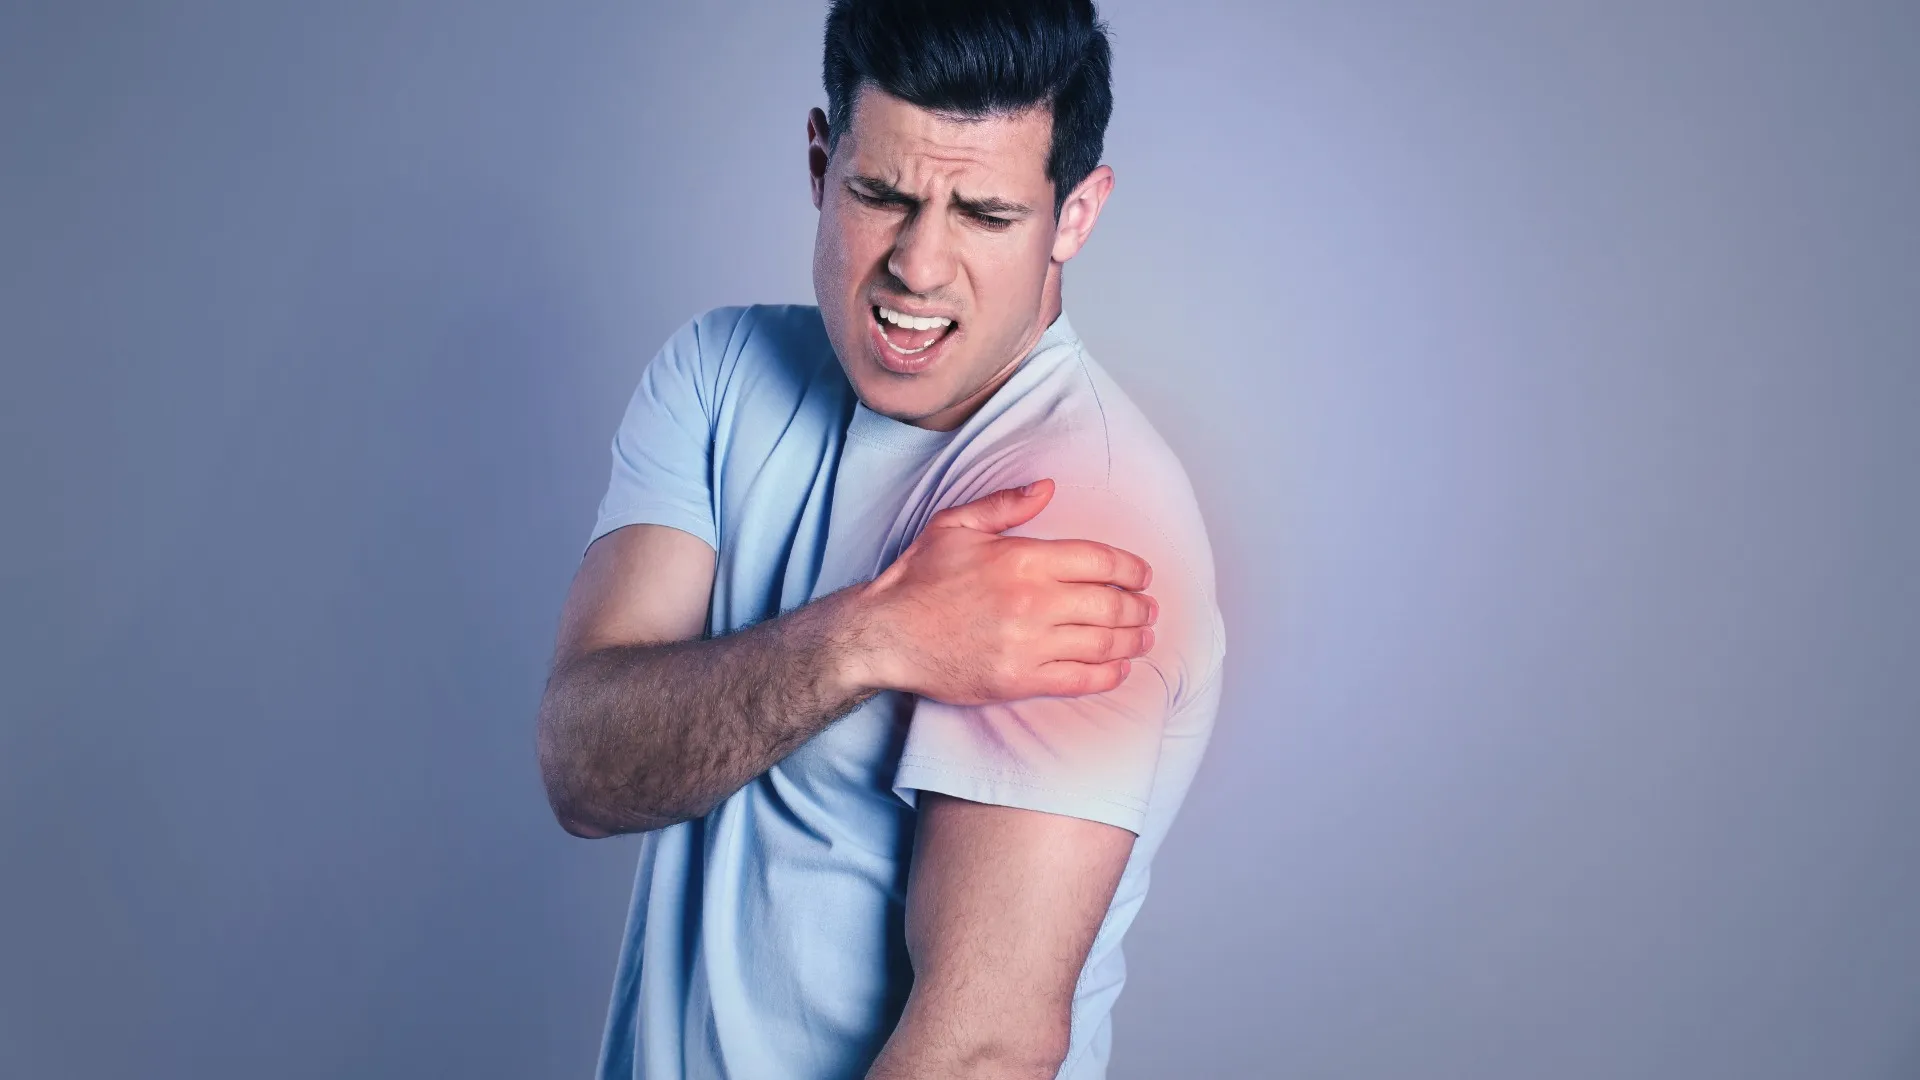 Rotator Cuff Injuries: Are They Just a Part of Aging?